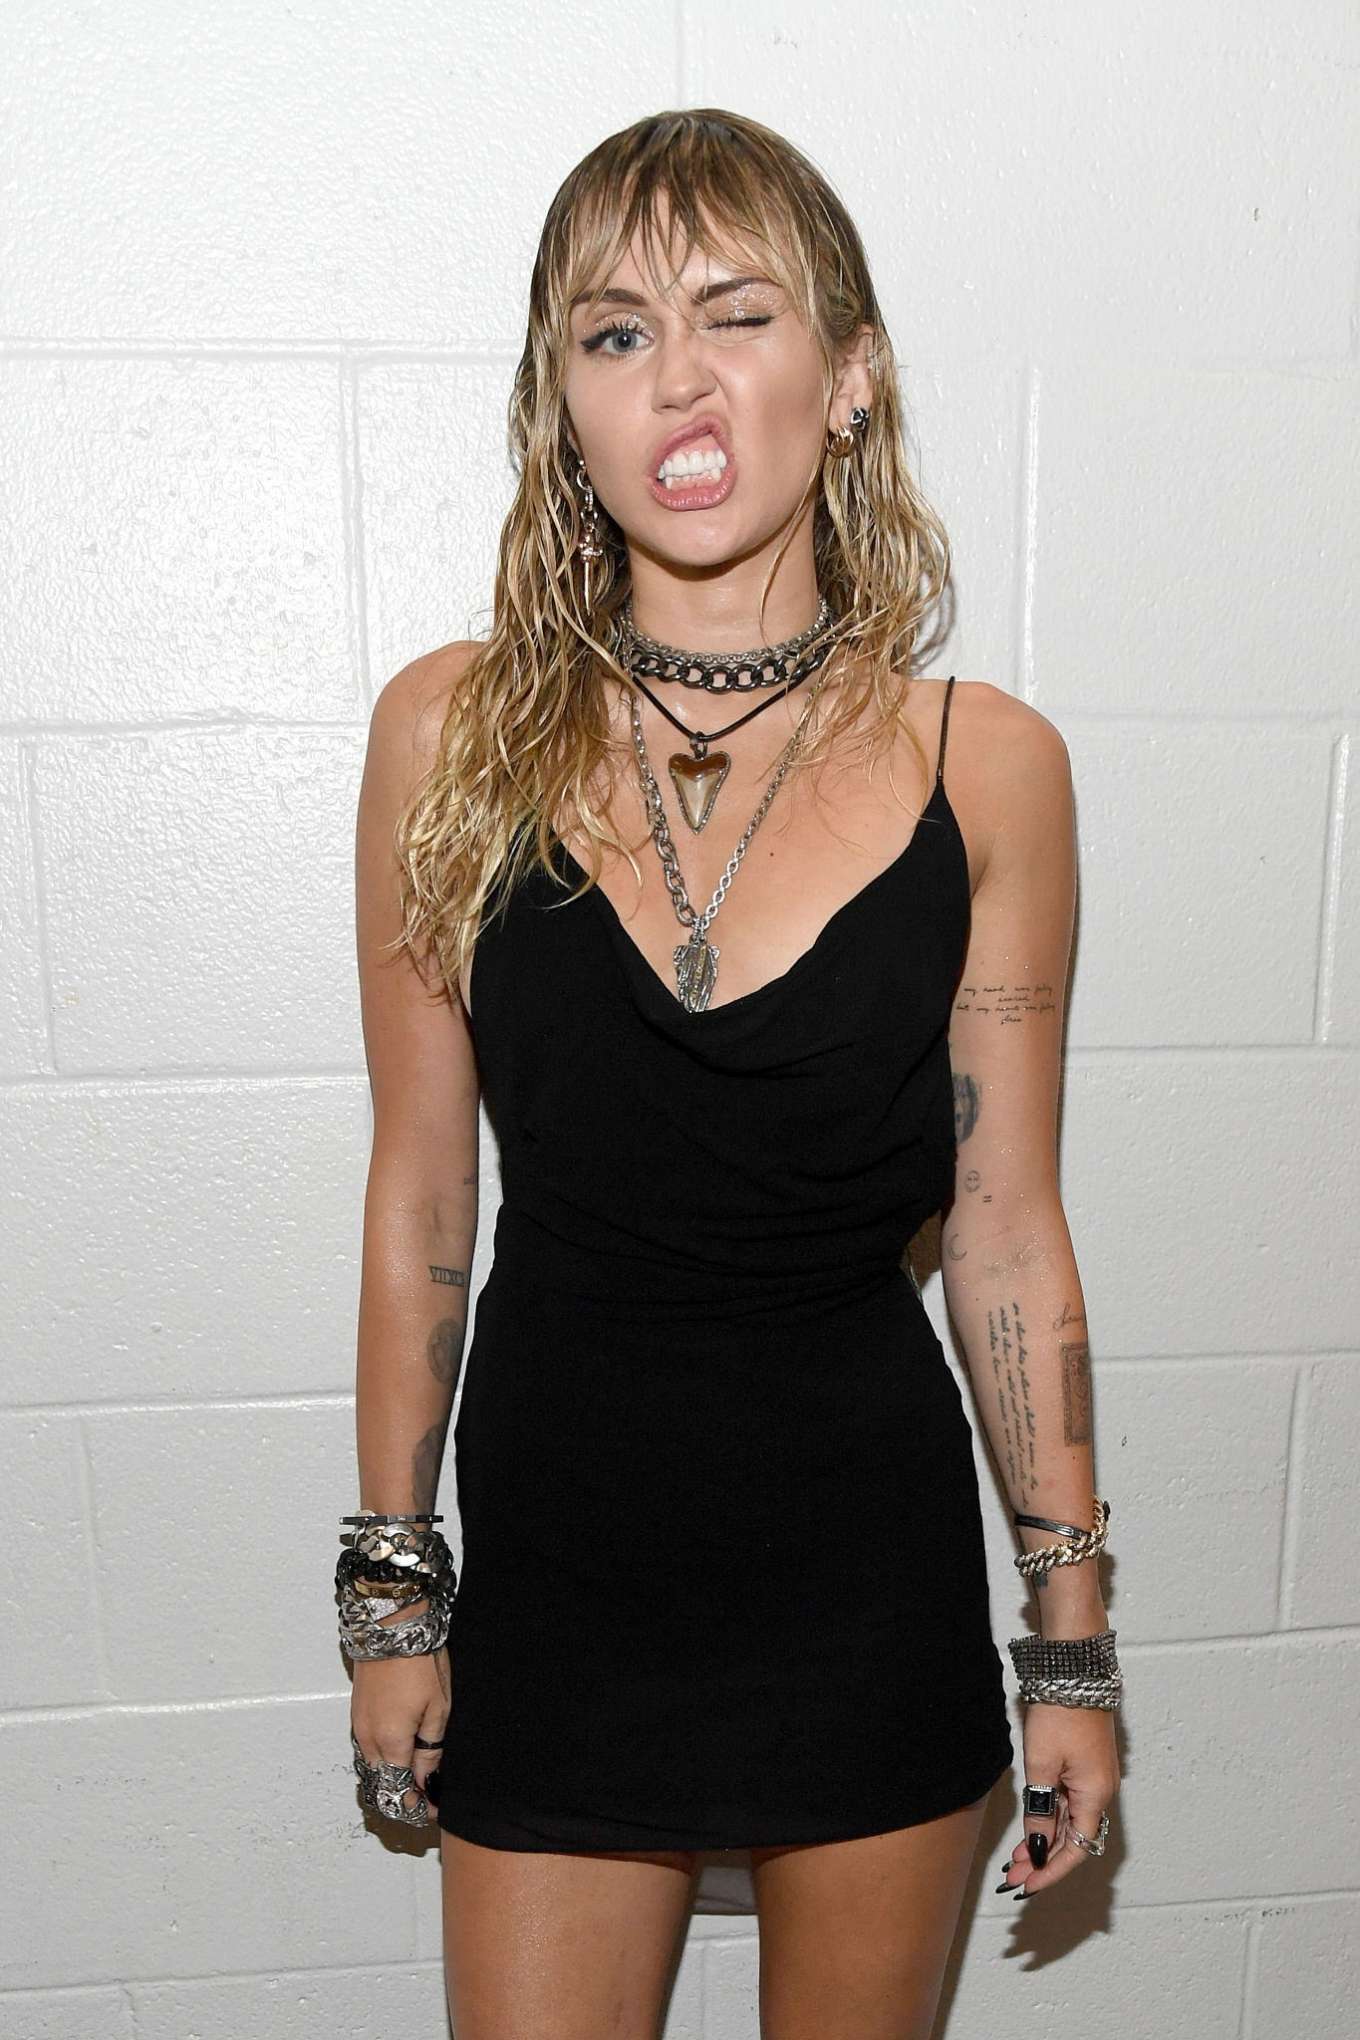 Miley Cyrus â€“ Backstage Photoshoot At The 2019 MTV Video Music Awards